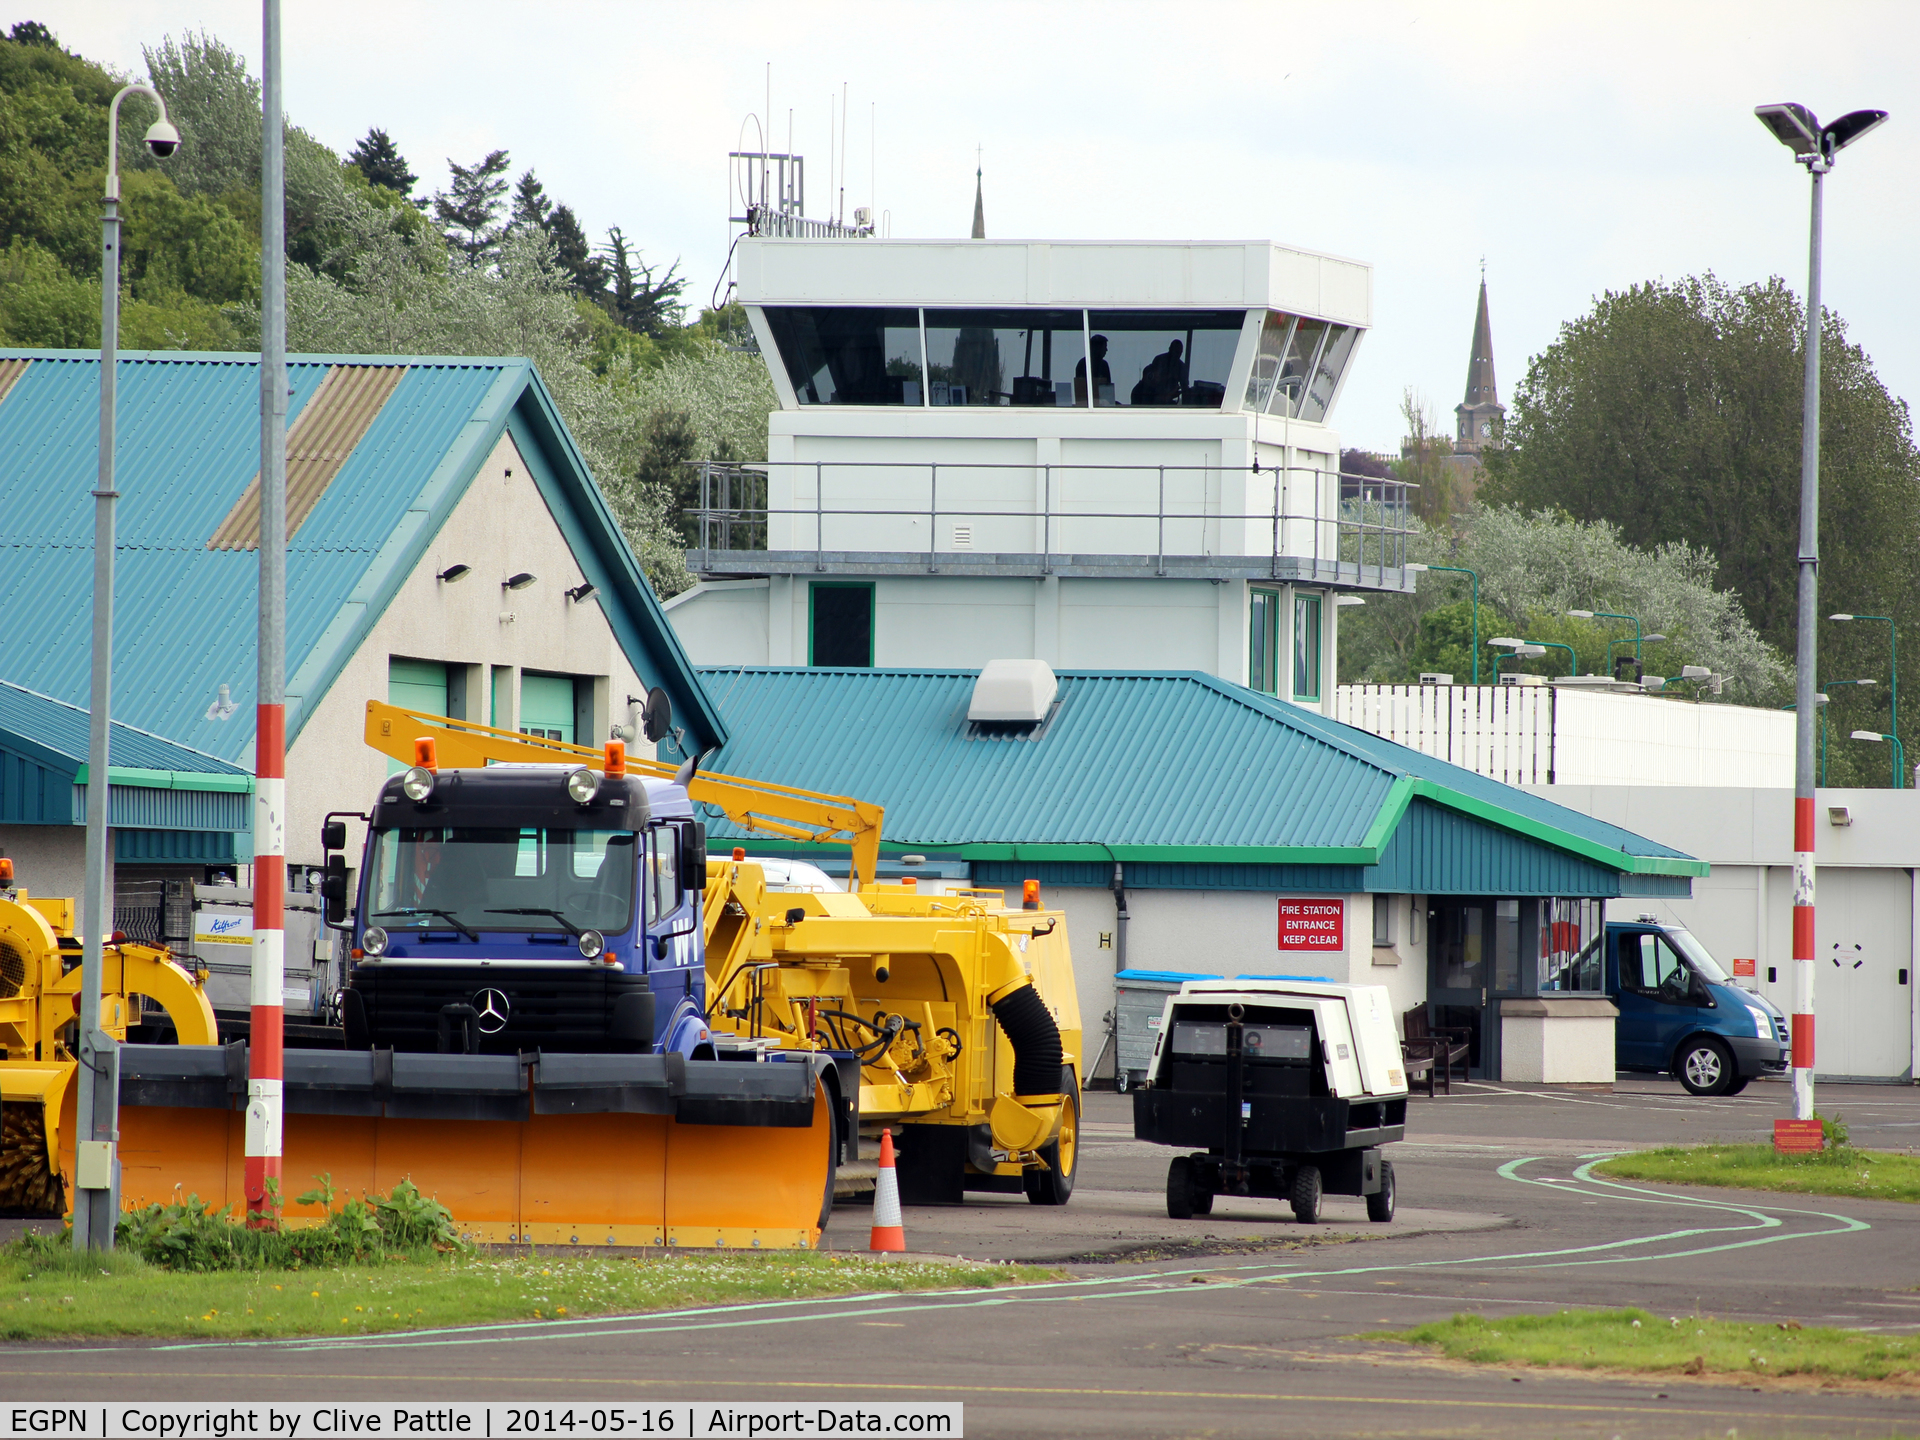 Dundee Airport, Dundee, Scotland United Kingdom (EGPN) - Tower and utility vehicles at Dundee Riverside EGPN